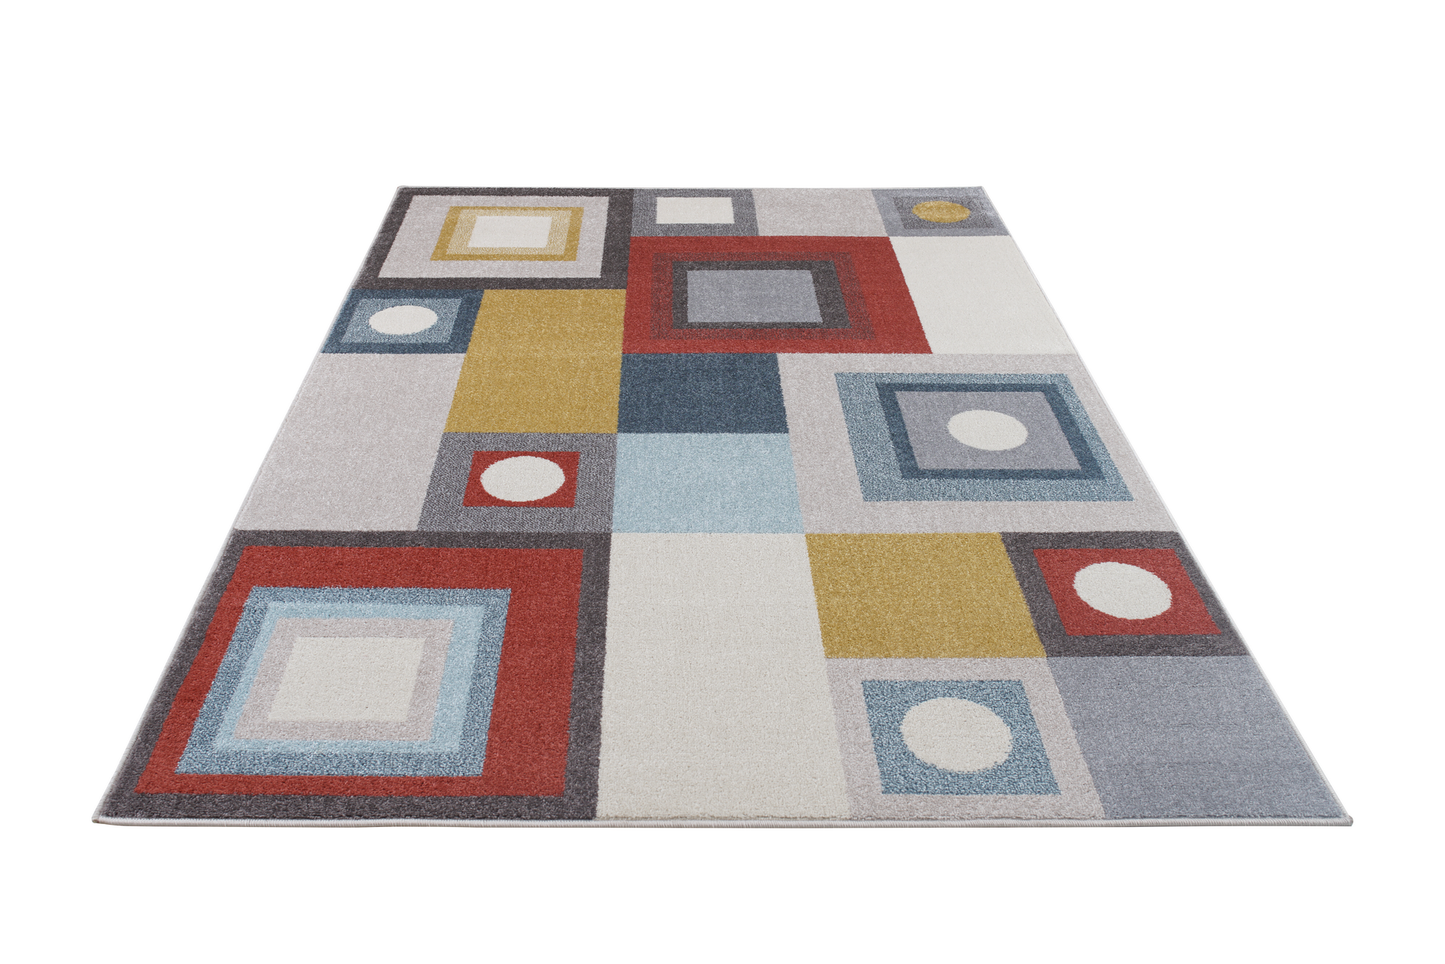 Ayala Bohemian Squares and Rounds Multicolor Area Rug